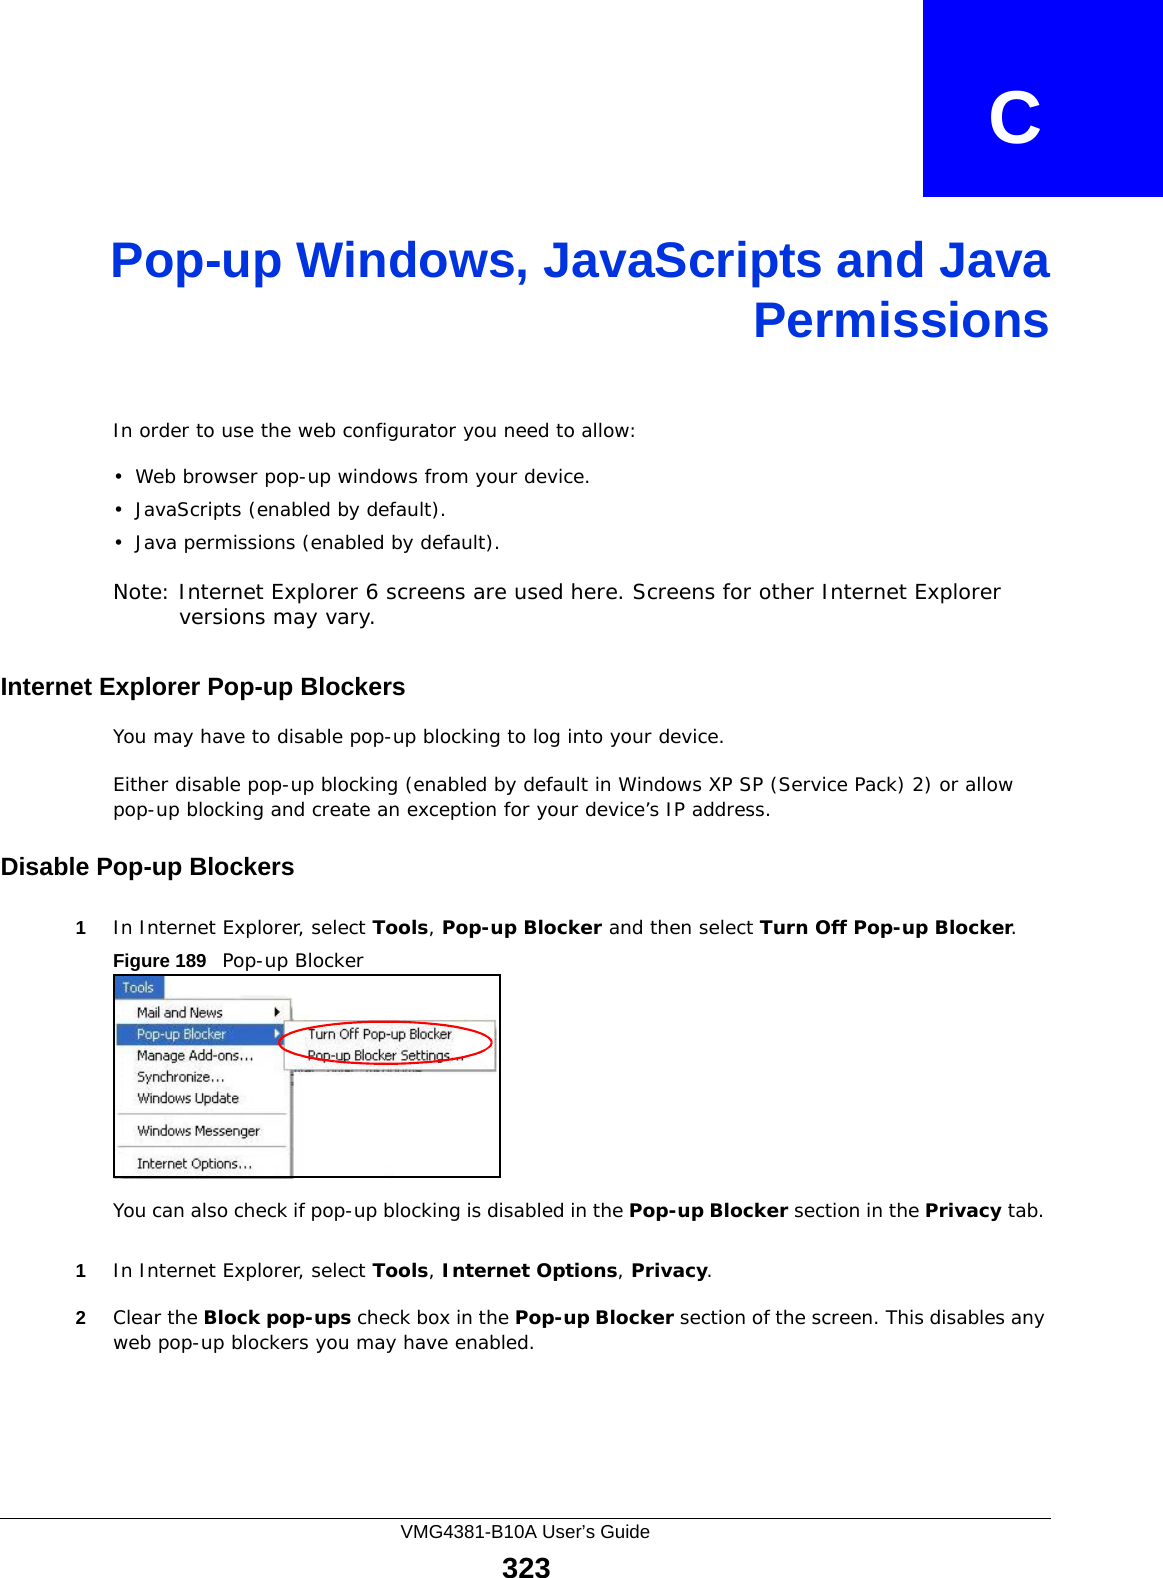 VMG4381-B10A User’s Guide323APPENDIX   CPop-up Windows, JavaScripts and JavaPermissionsIn order to use the web configurator you need to allow:• Web browser pop-up windows from your device.• JavaScripts (enabled by default).• Java permissions (enabled by default).Note: Internet Explorer 6 screens are used here. Screens for other Internet Explorer versions may vary.Internet Explorer Pop-up BlockersYou may have to disable pop-up blocking to log into your device. Either disable pop-up blocking (enabled by default in Windows XP SP (Service Pack) 2) or allow pop-up blocking and create an exception for your device’s IP address.Disable Pop-up Blockers1In Internet Explorer, select Tools, Pop-up Blocker and then select Turn Off Pop-up Blocker. Figure 189   Pop-up BlockerYou can also check if pop-up blocking is disabled in the Pop-up Blocker section in the Privacy tab. 1In Internet Explorer, select Tools, Internet Options, Privacy.2Clear the Block pop-ups check box in the Pop-up Blocker section of the screen. This disables any web pop-up blockers you may have enabled. 